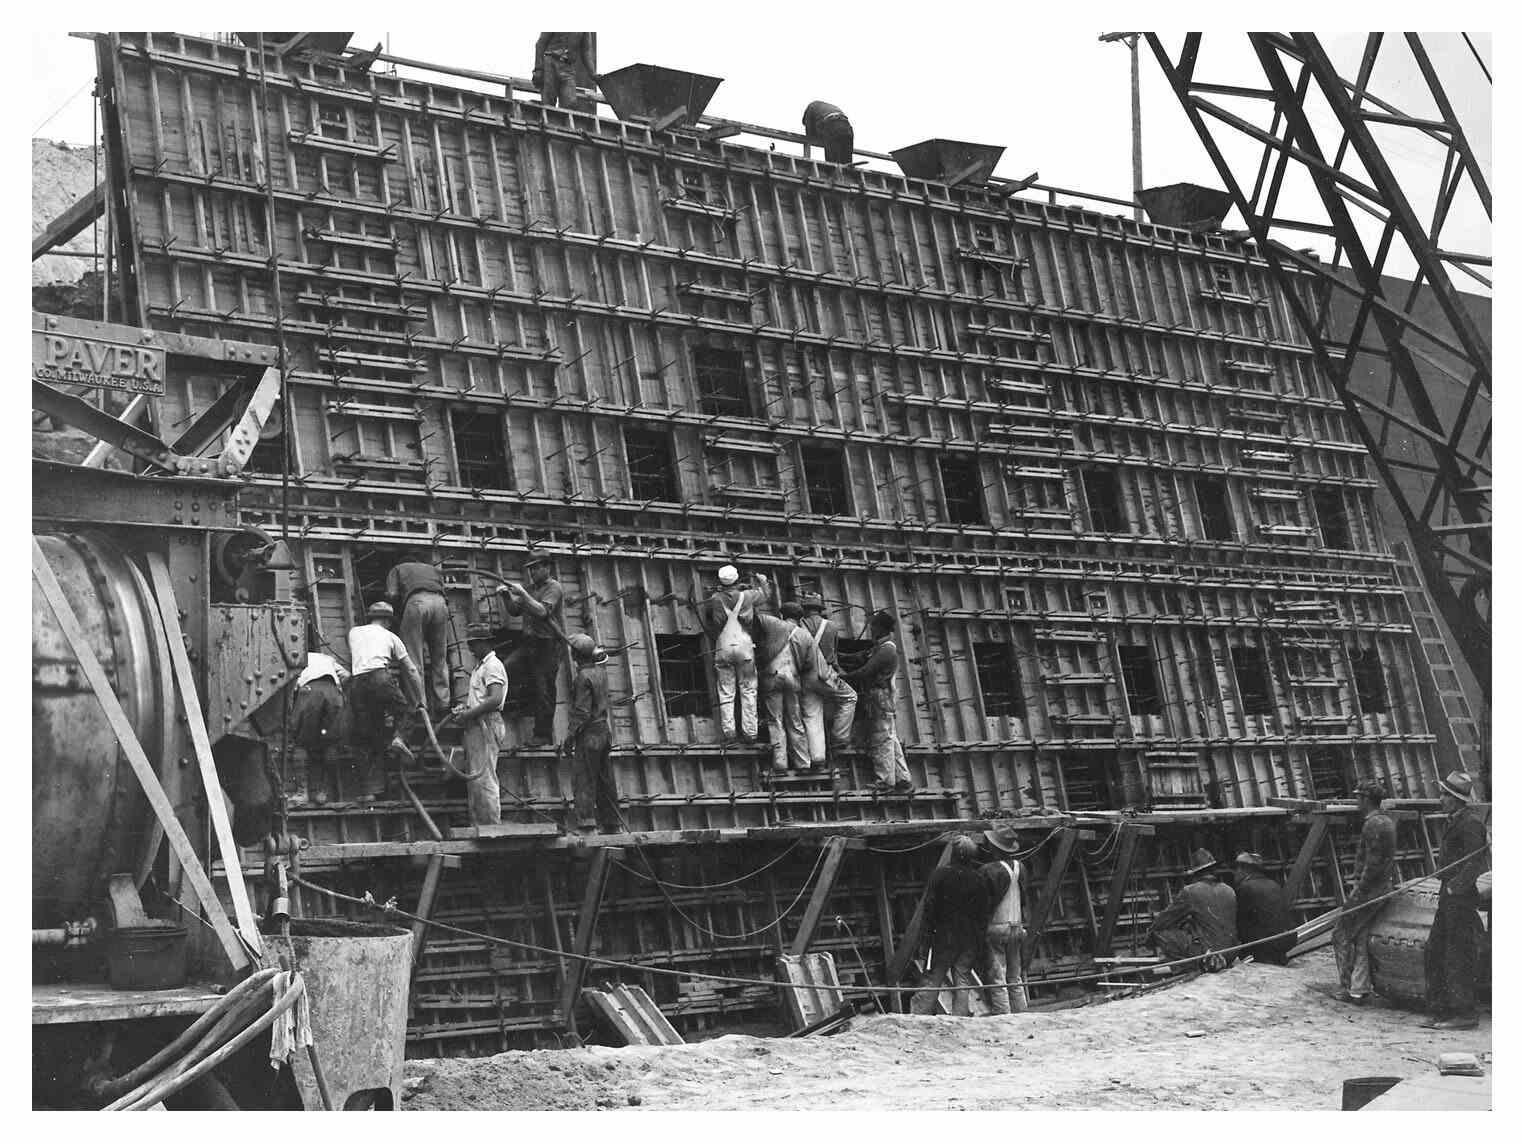 Historical black and white image of construction workers standing on scaffolding pouring concrete into wooden-form windows to start the channelization of the L.A. River.